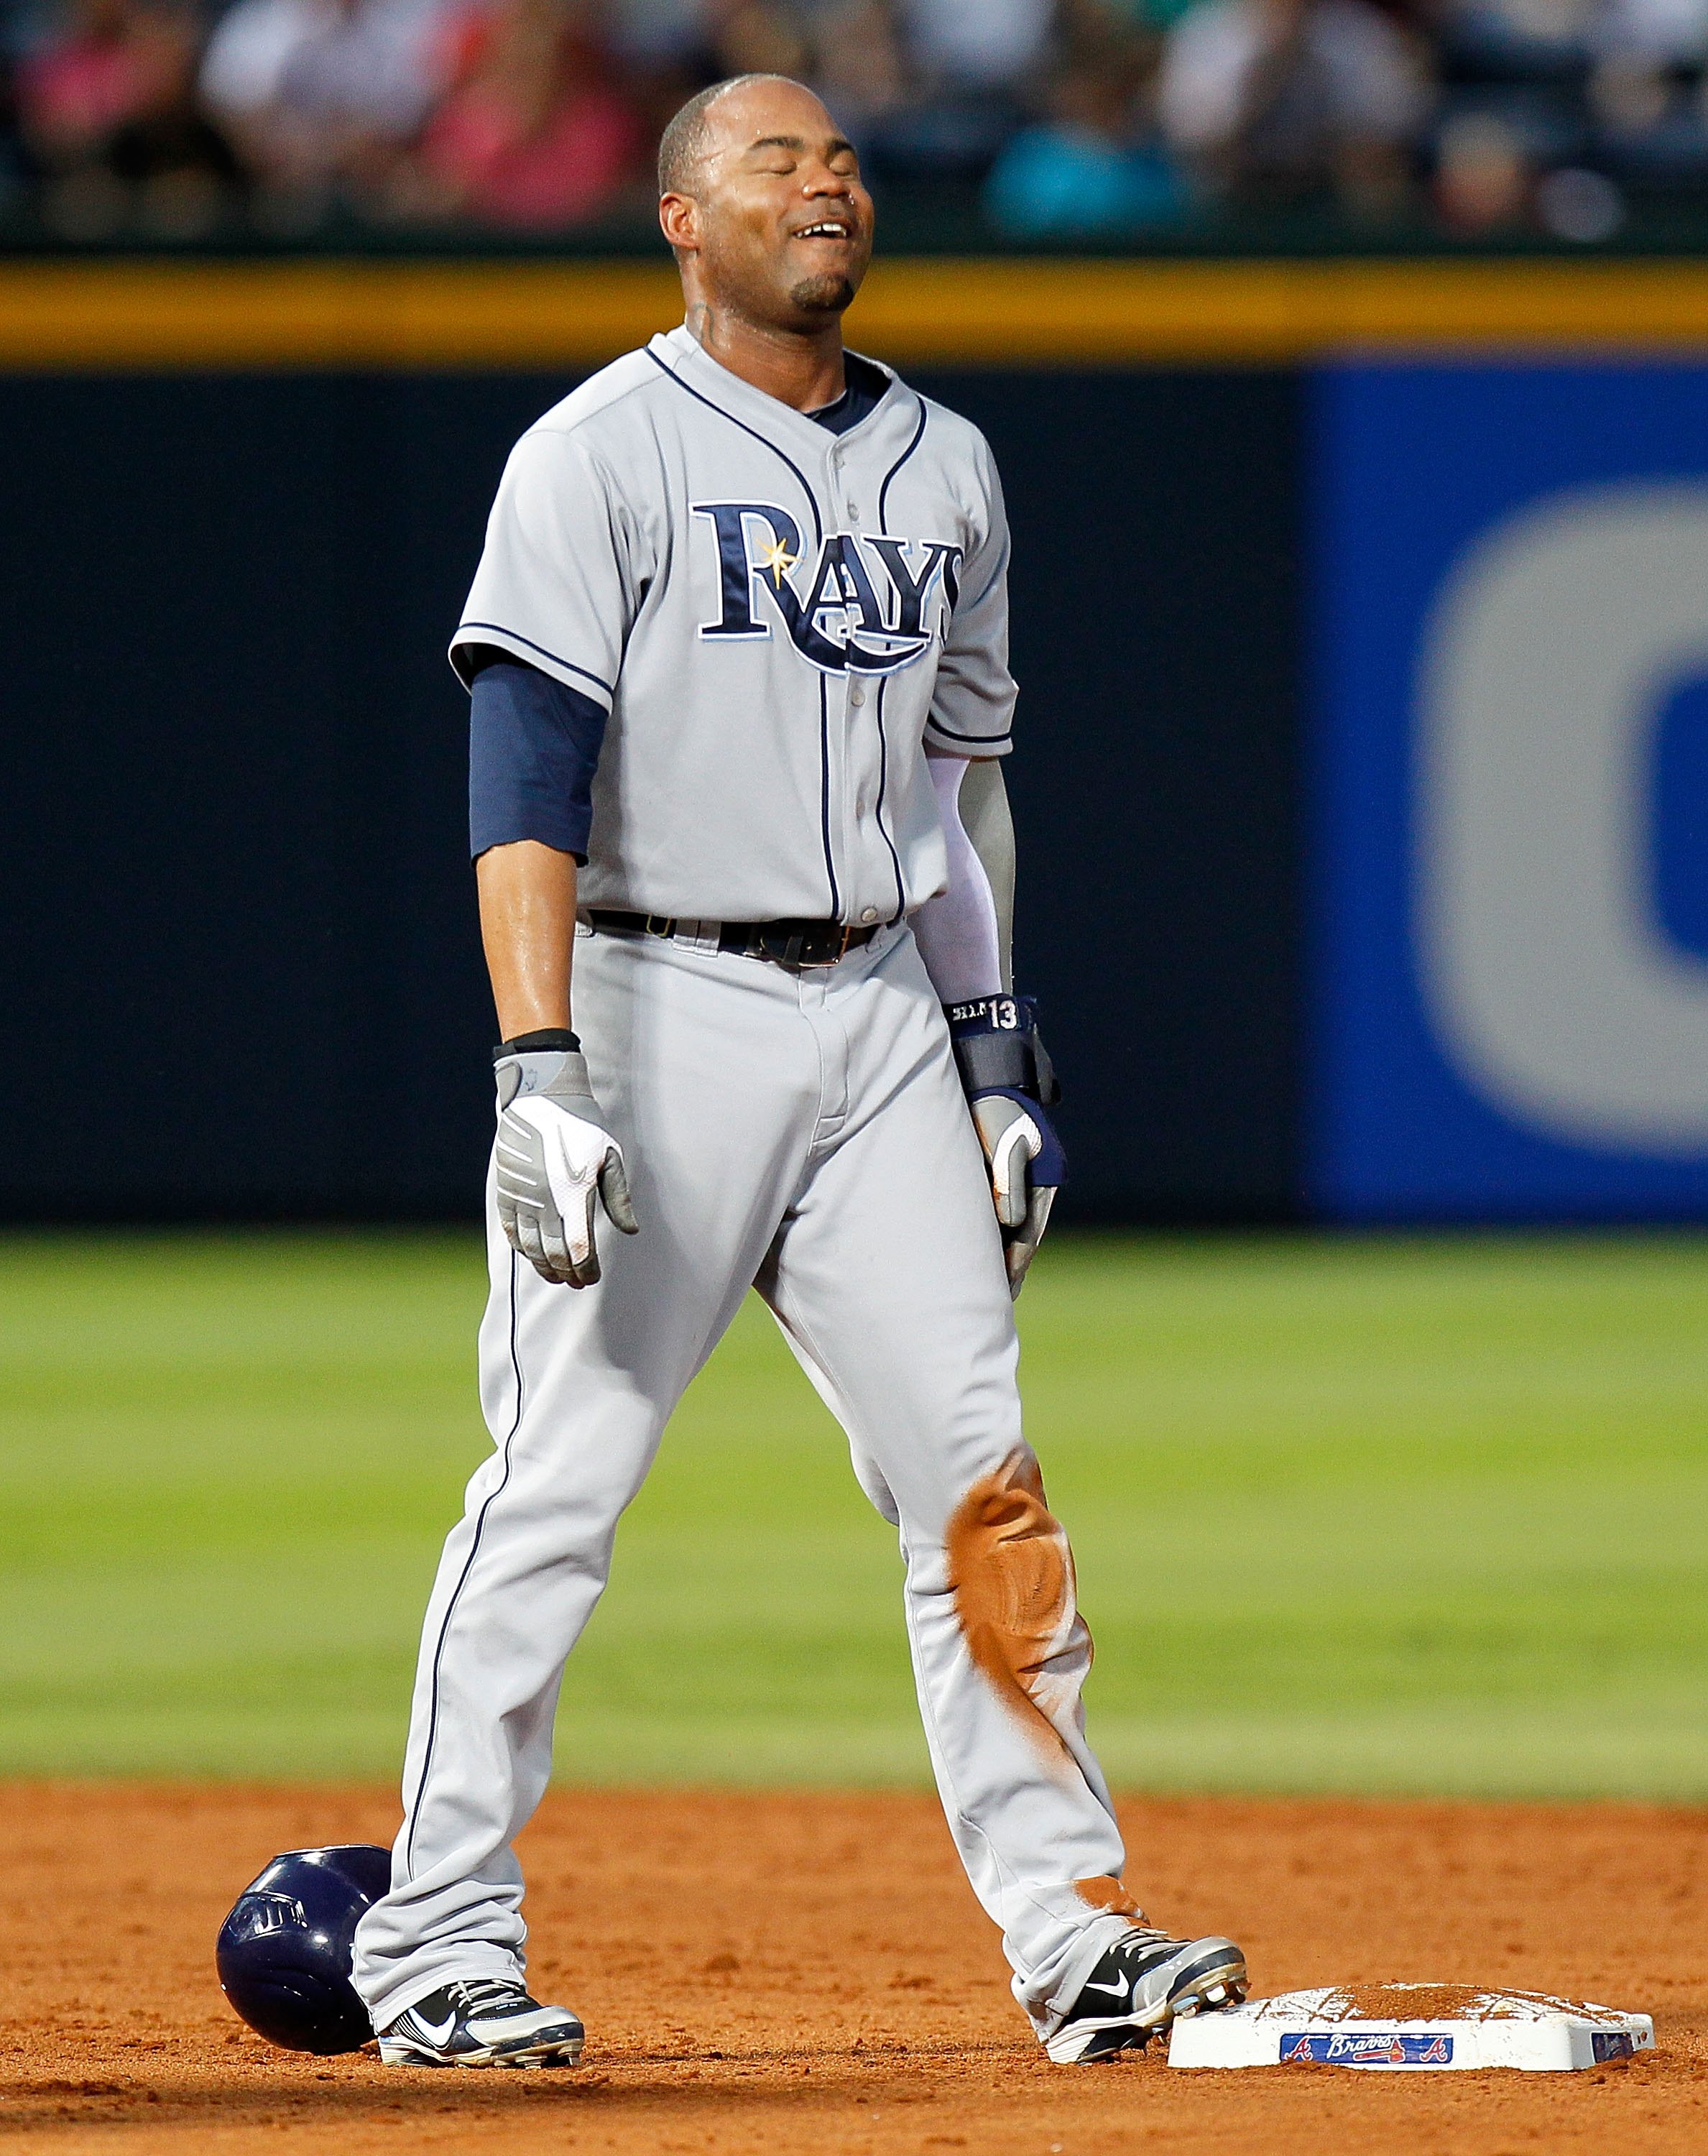 280 Tampa Bay Rays Manny Ramirez Photos & High Res Pictures - Getty Images